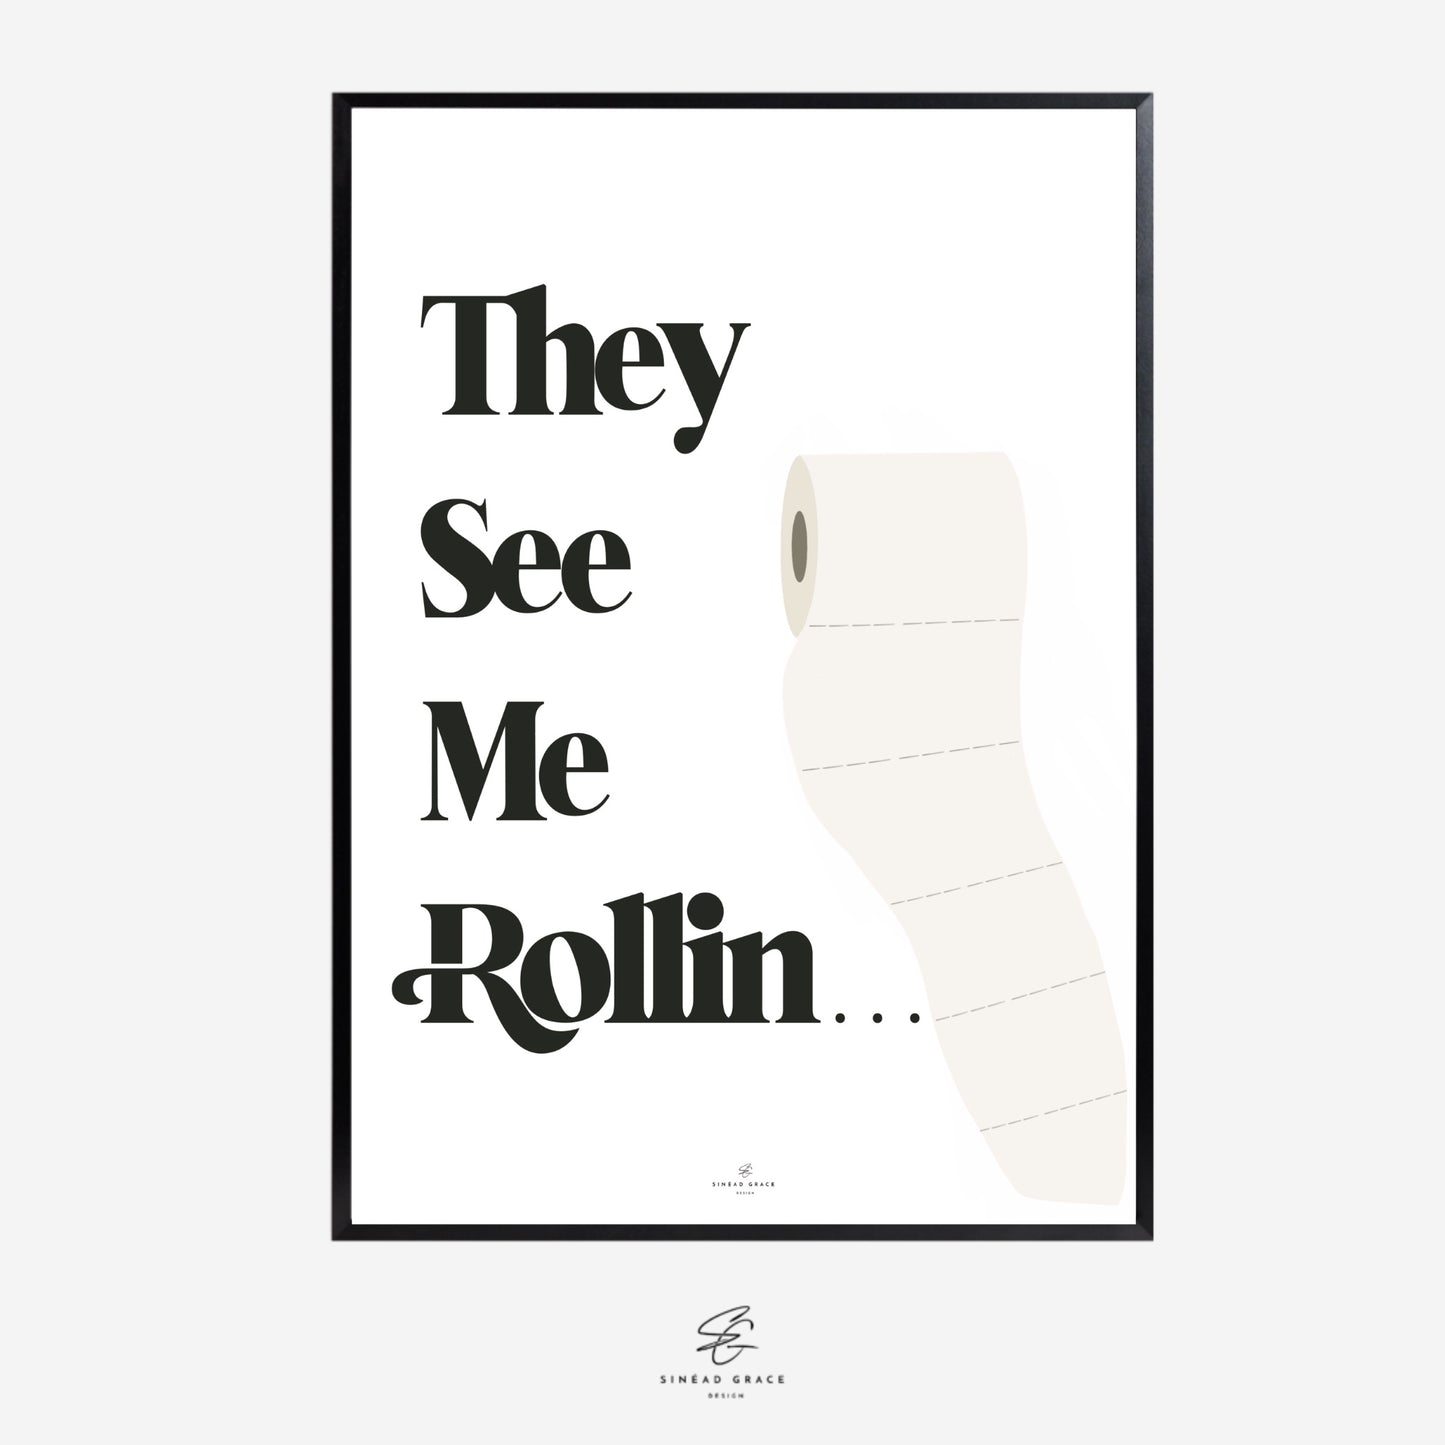 They See Me Rolling Bathroom Print